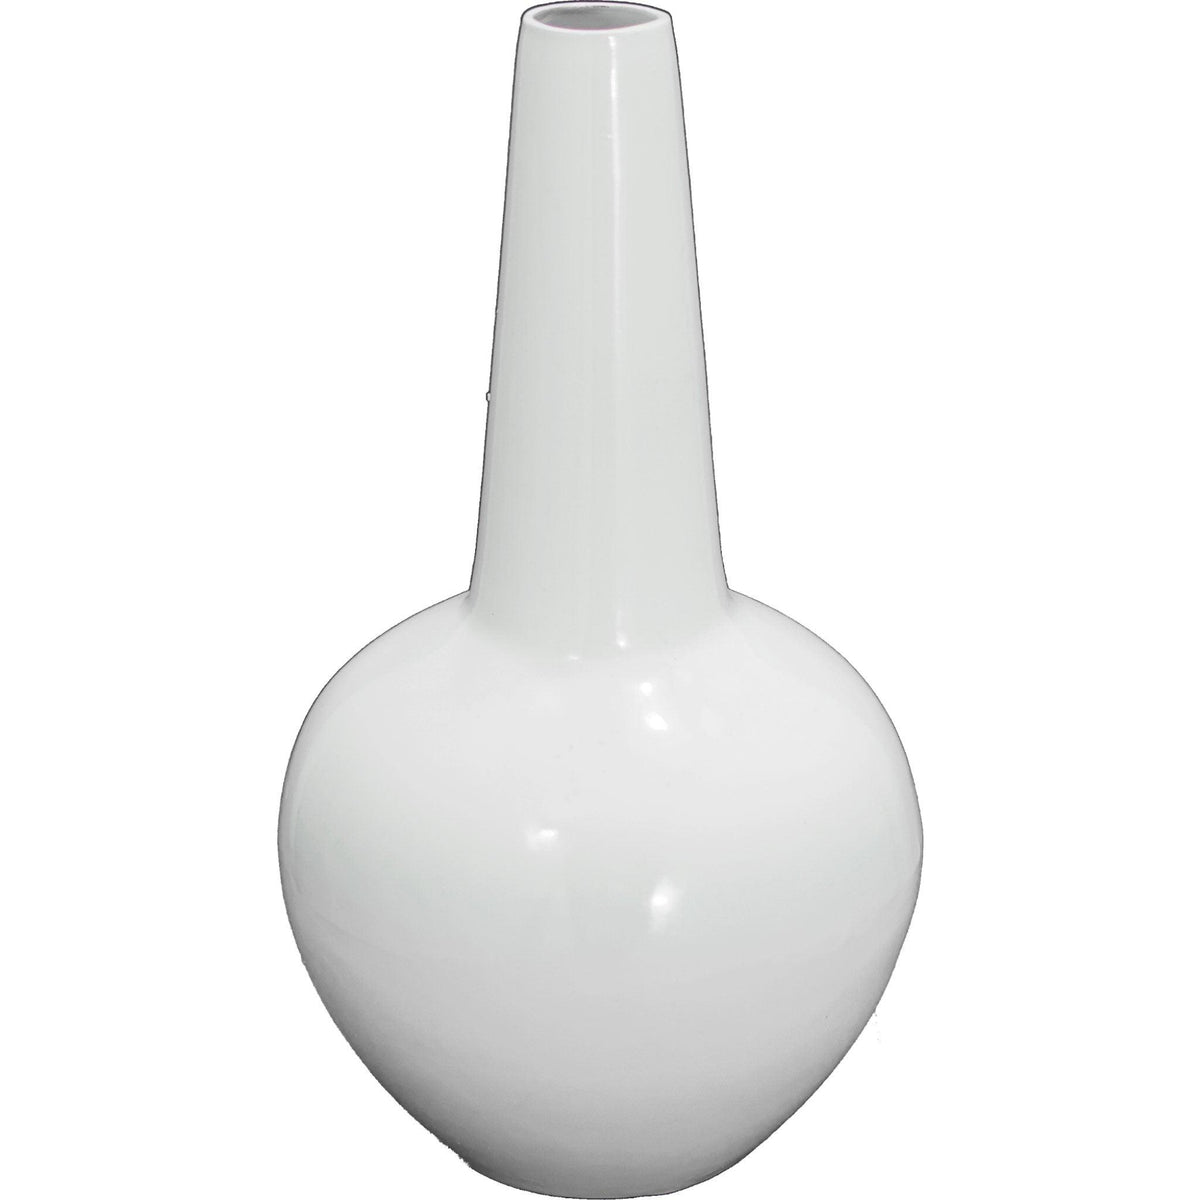 Lee Display's brand new 14in Amphora Greek Ceramic Vase comes in a high gloss white finish on sale at leedisplay.com